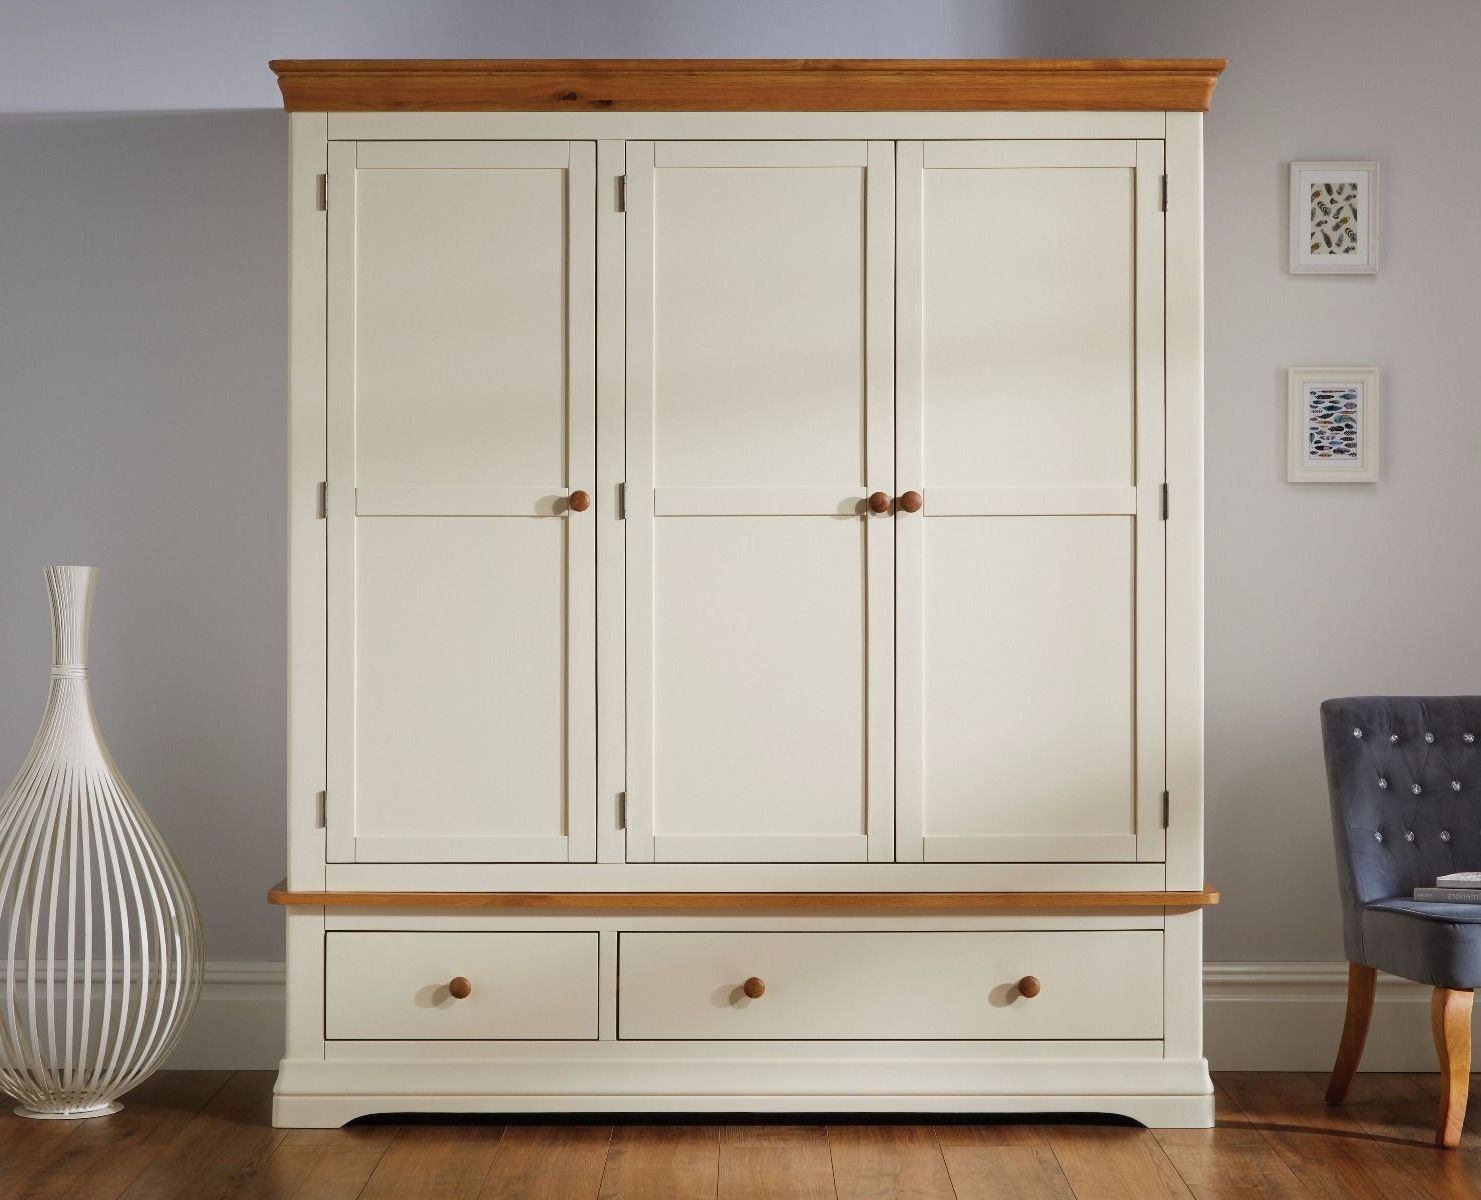 Farmhouse Cream Painted Triple Oak Wardrobe – Free Delivery | Top Furniture With Regard To Cream Triple Wardrobes (Gallery 5 of 20)